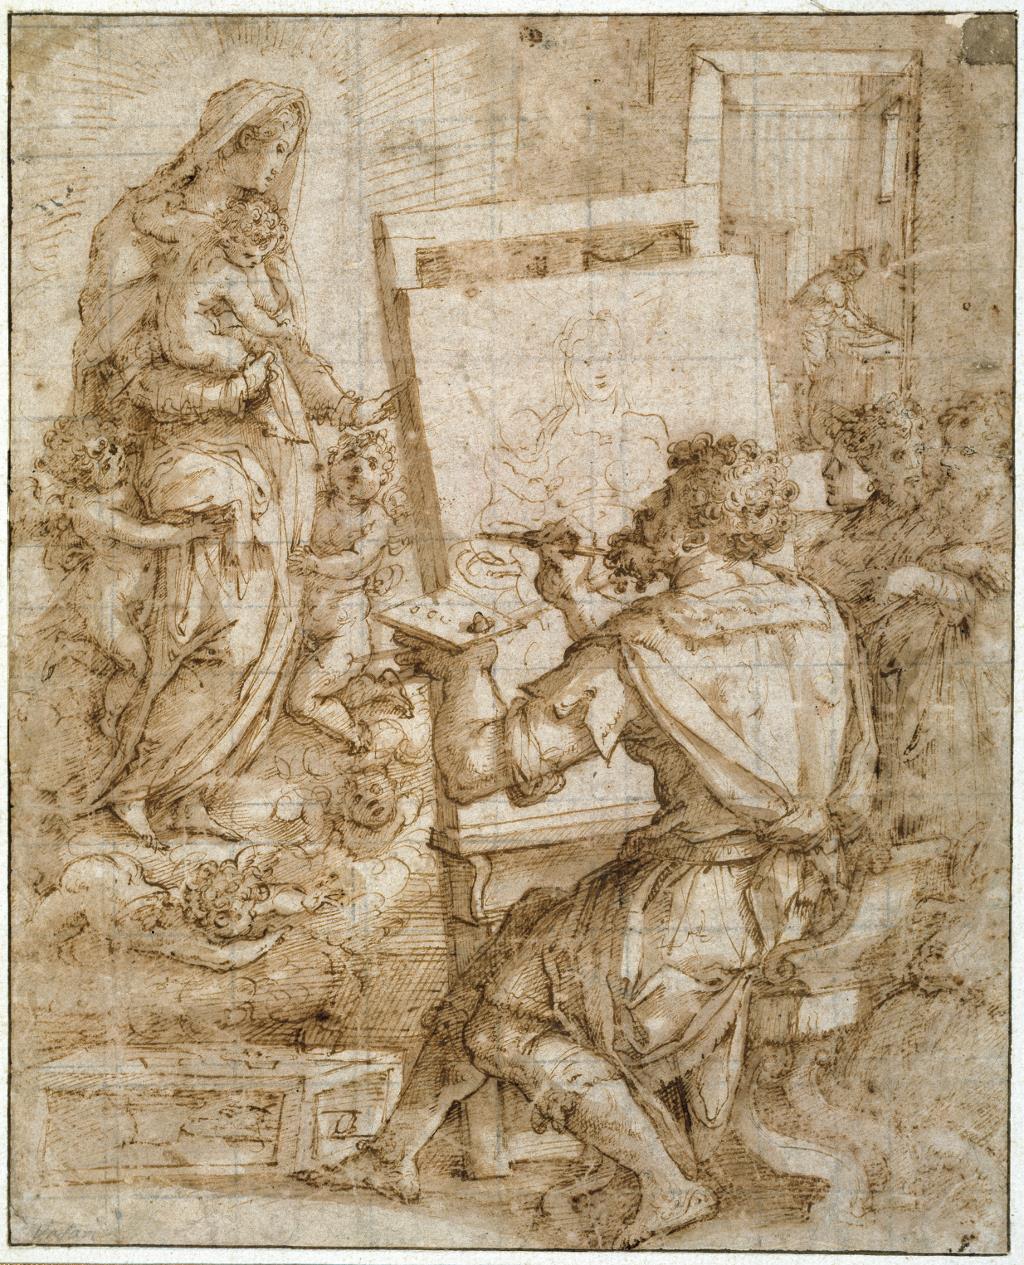 Drawing in the 16th century